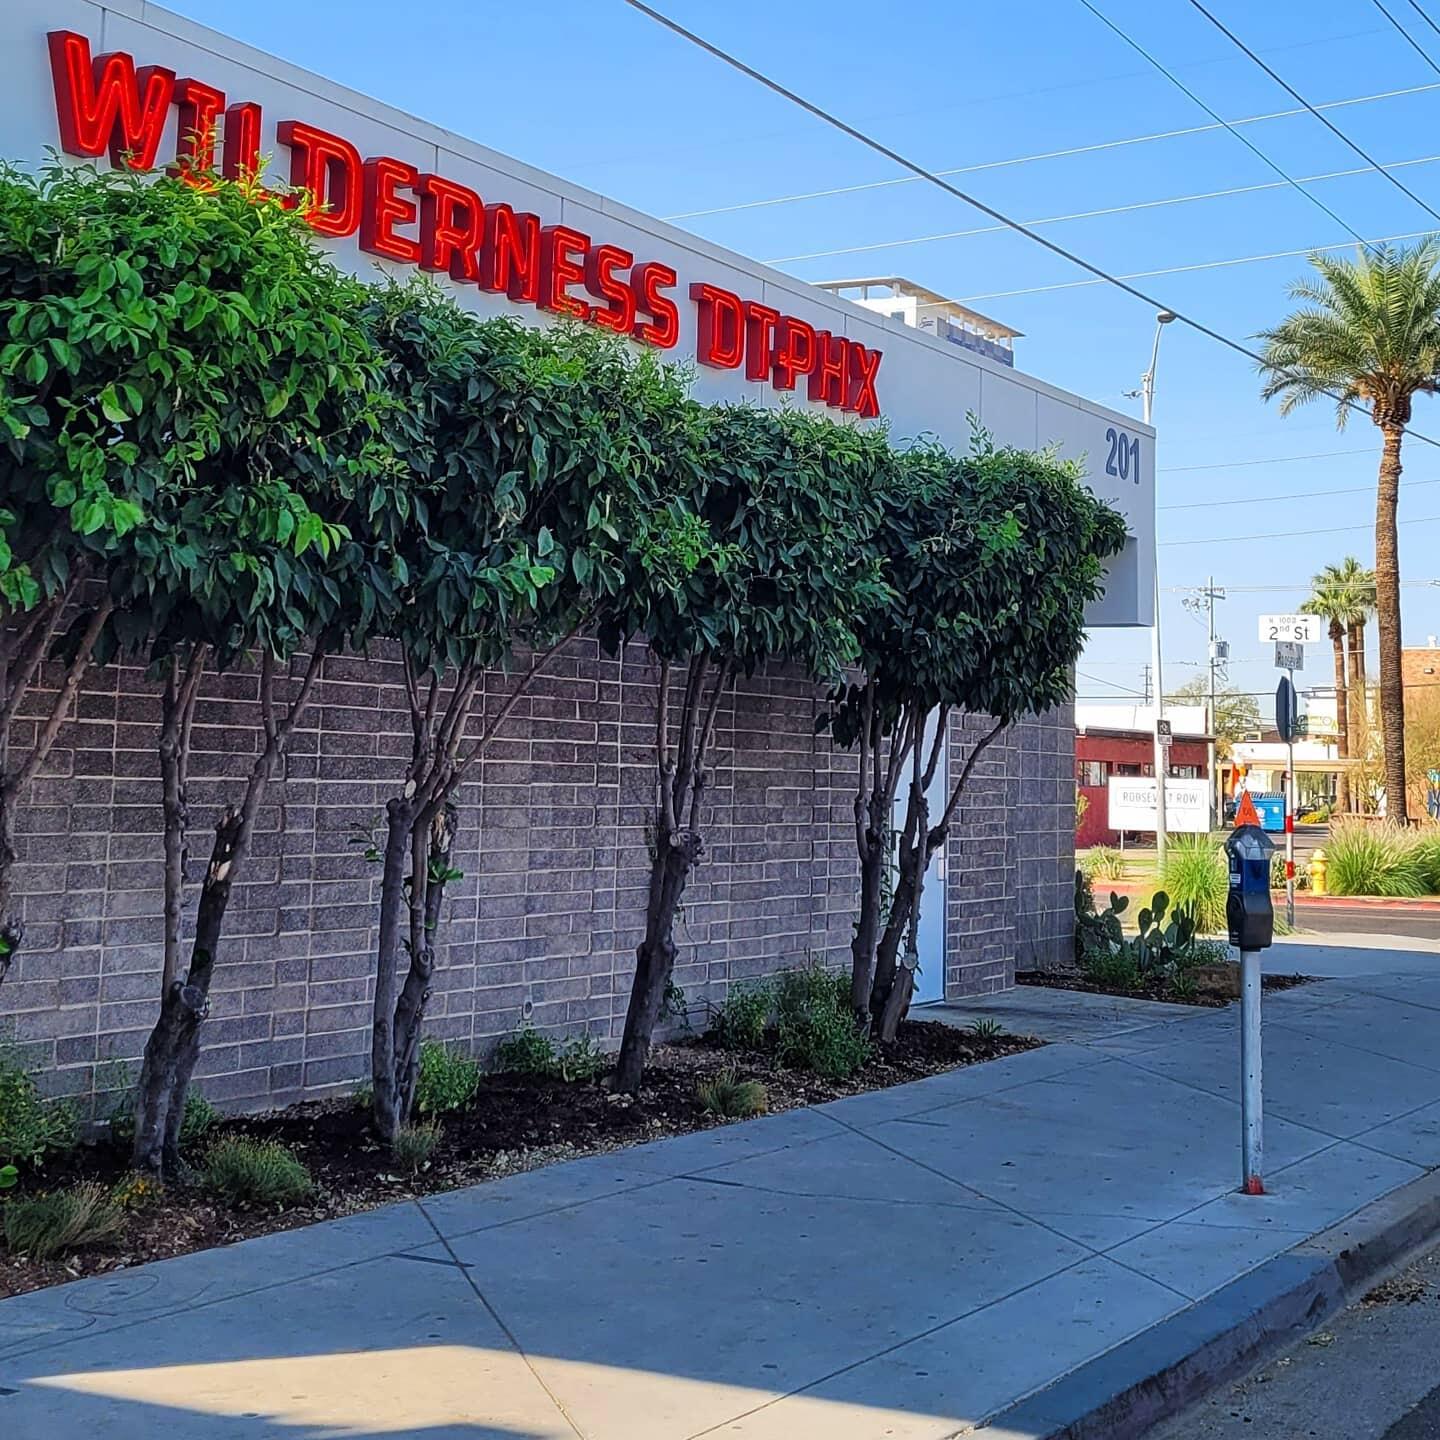 Arizona Wilderness Brewing Company's storefront on Roosevelt Avenue, now packed with native plants!